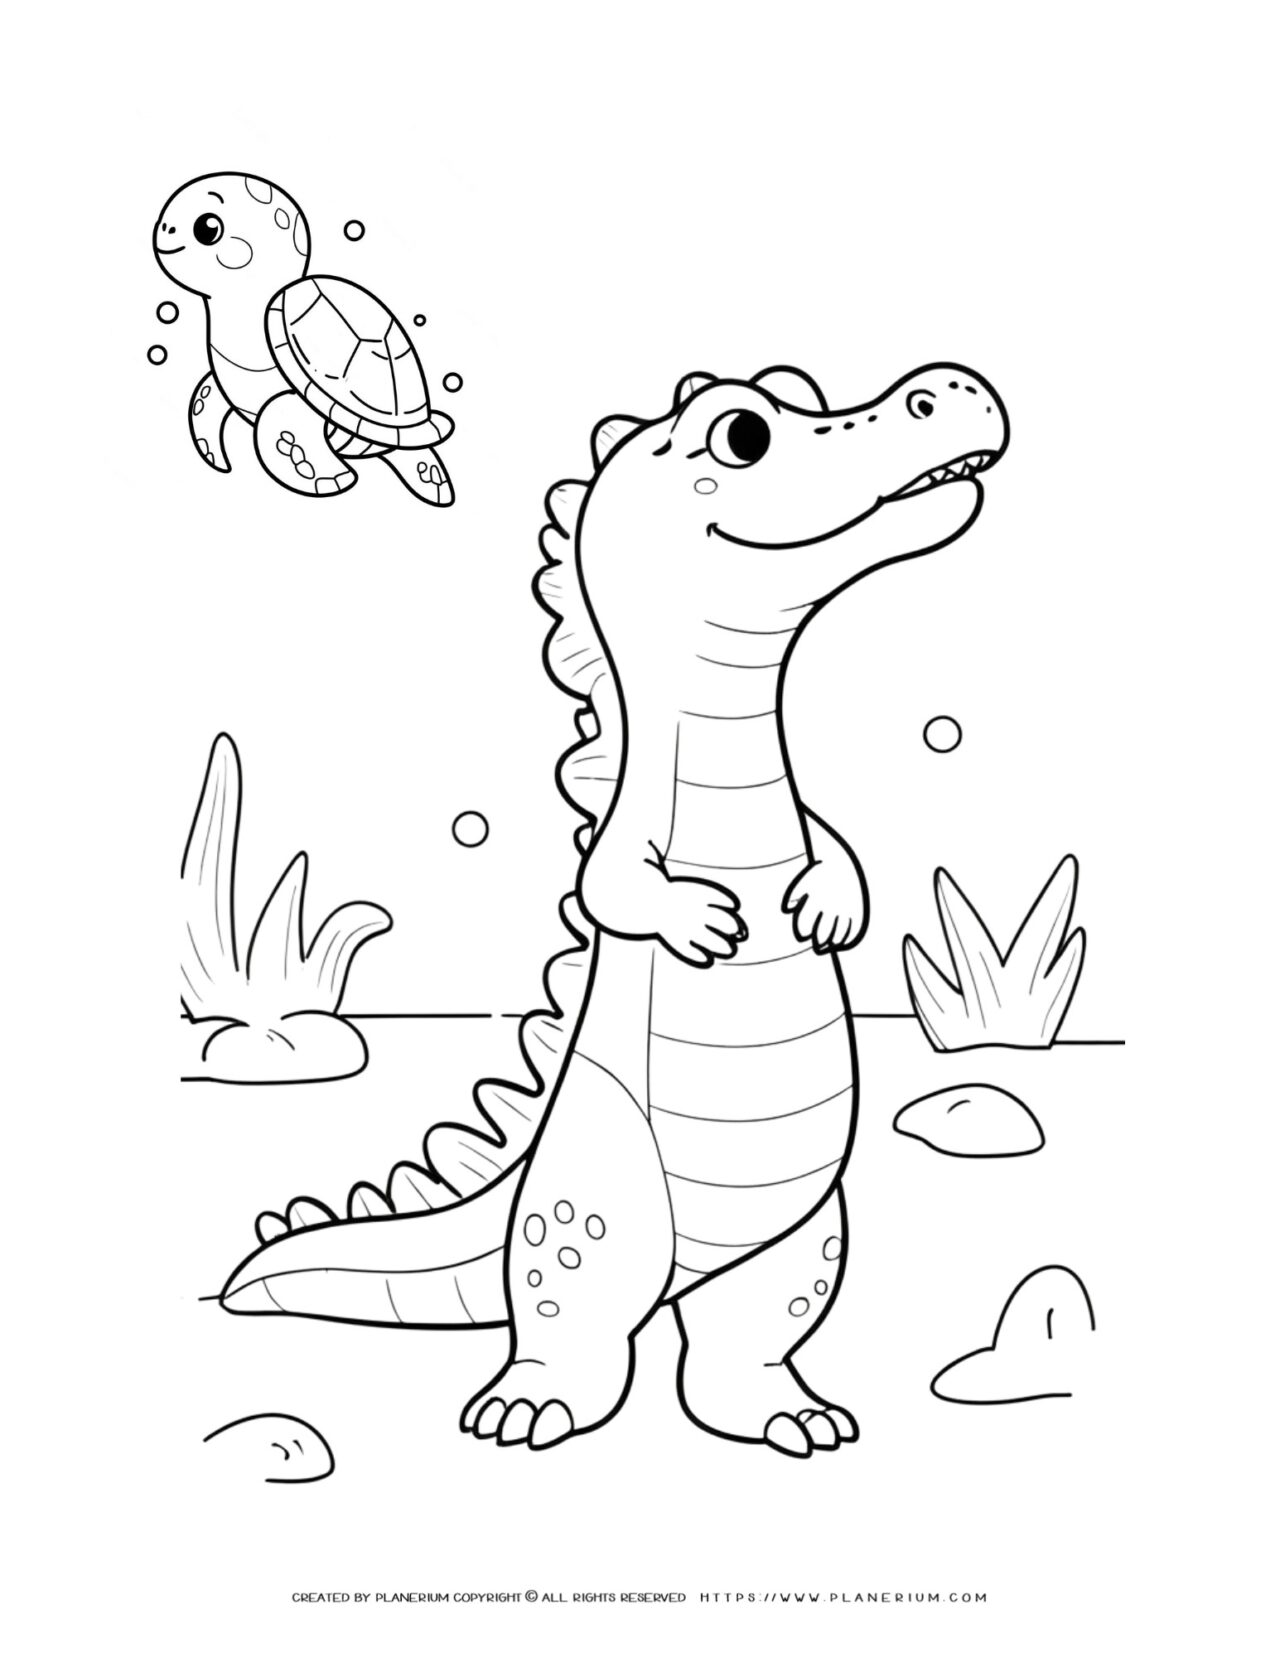 Alligator-and-Sea-Turtle-Animal-Underwater-Coloring-Page-for-Kids